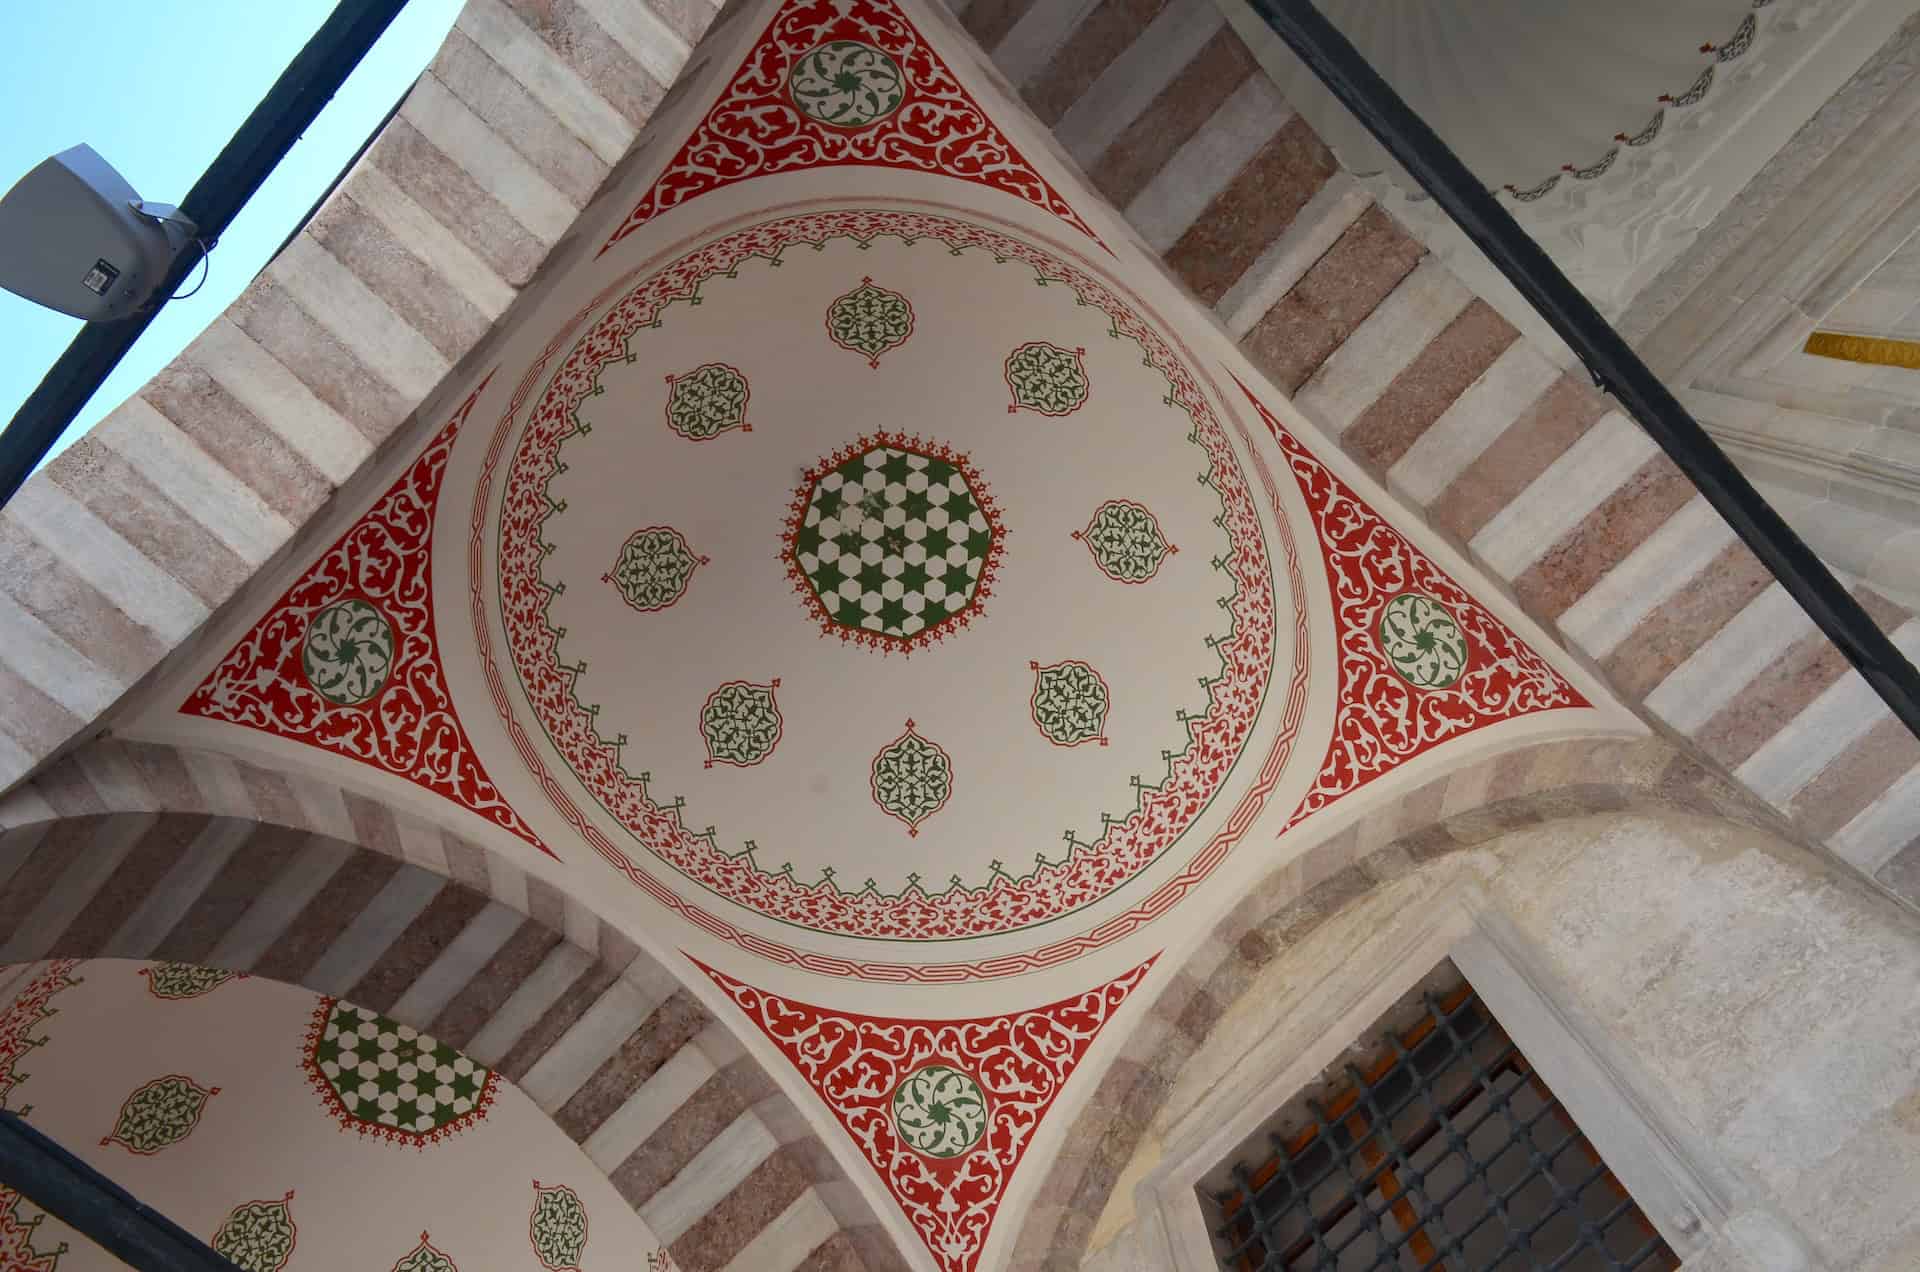 Geometric designs on the underside of a dome in the courtyard